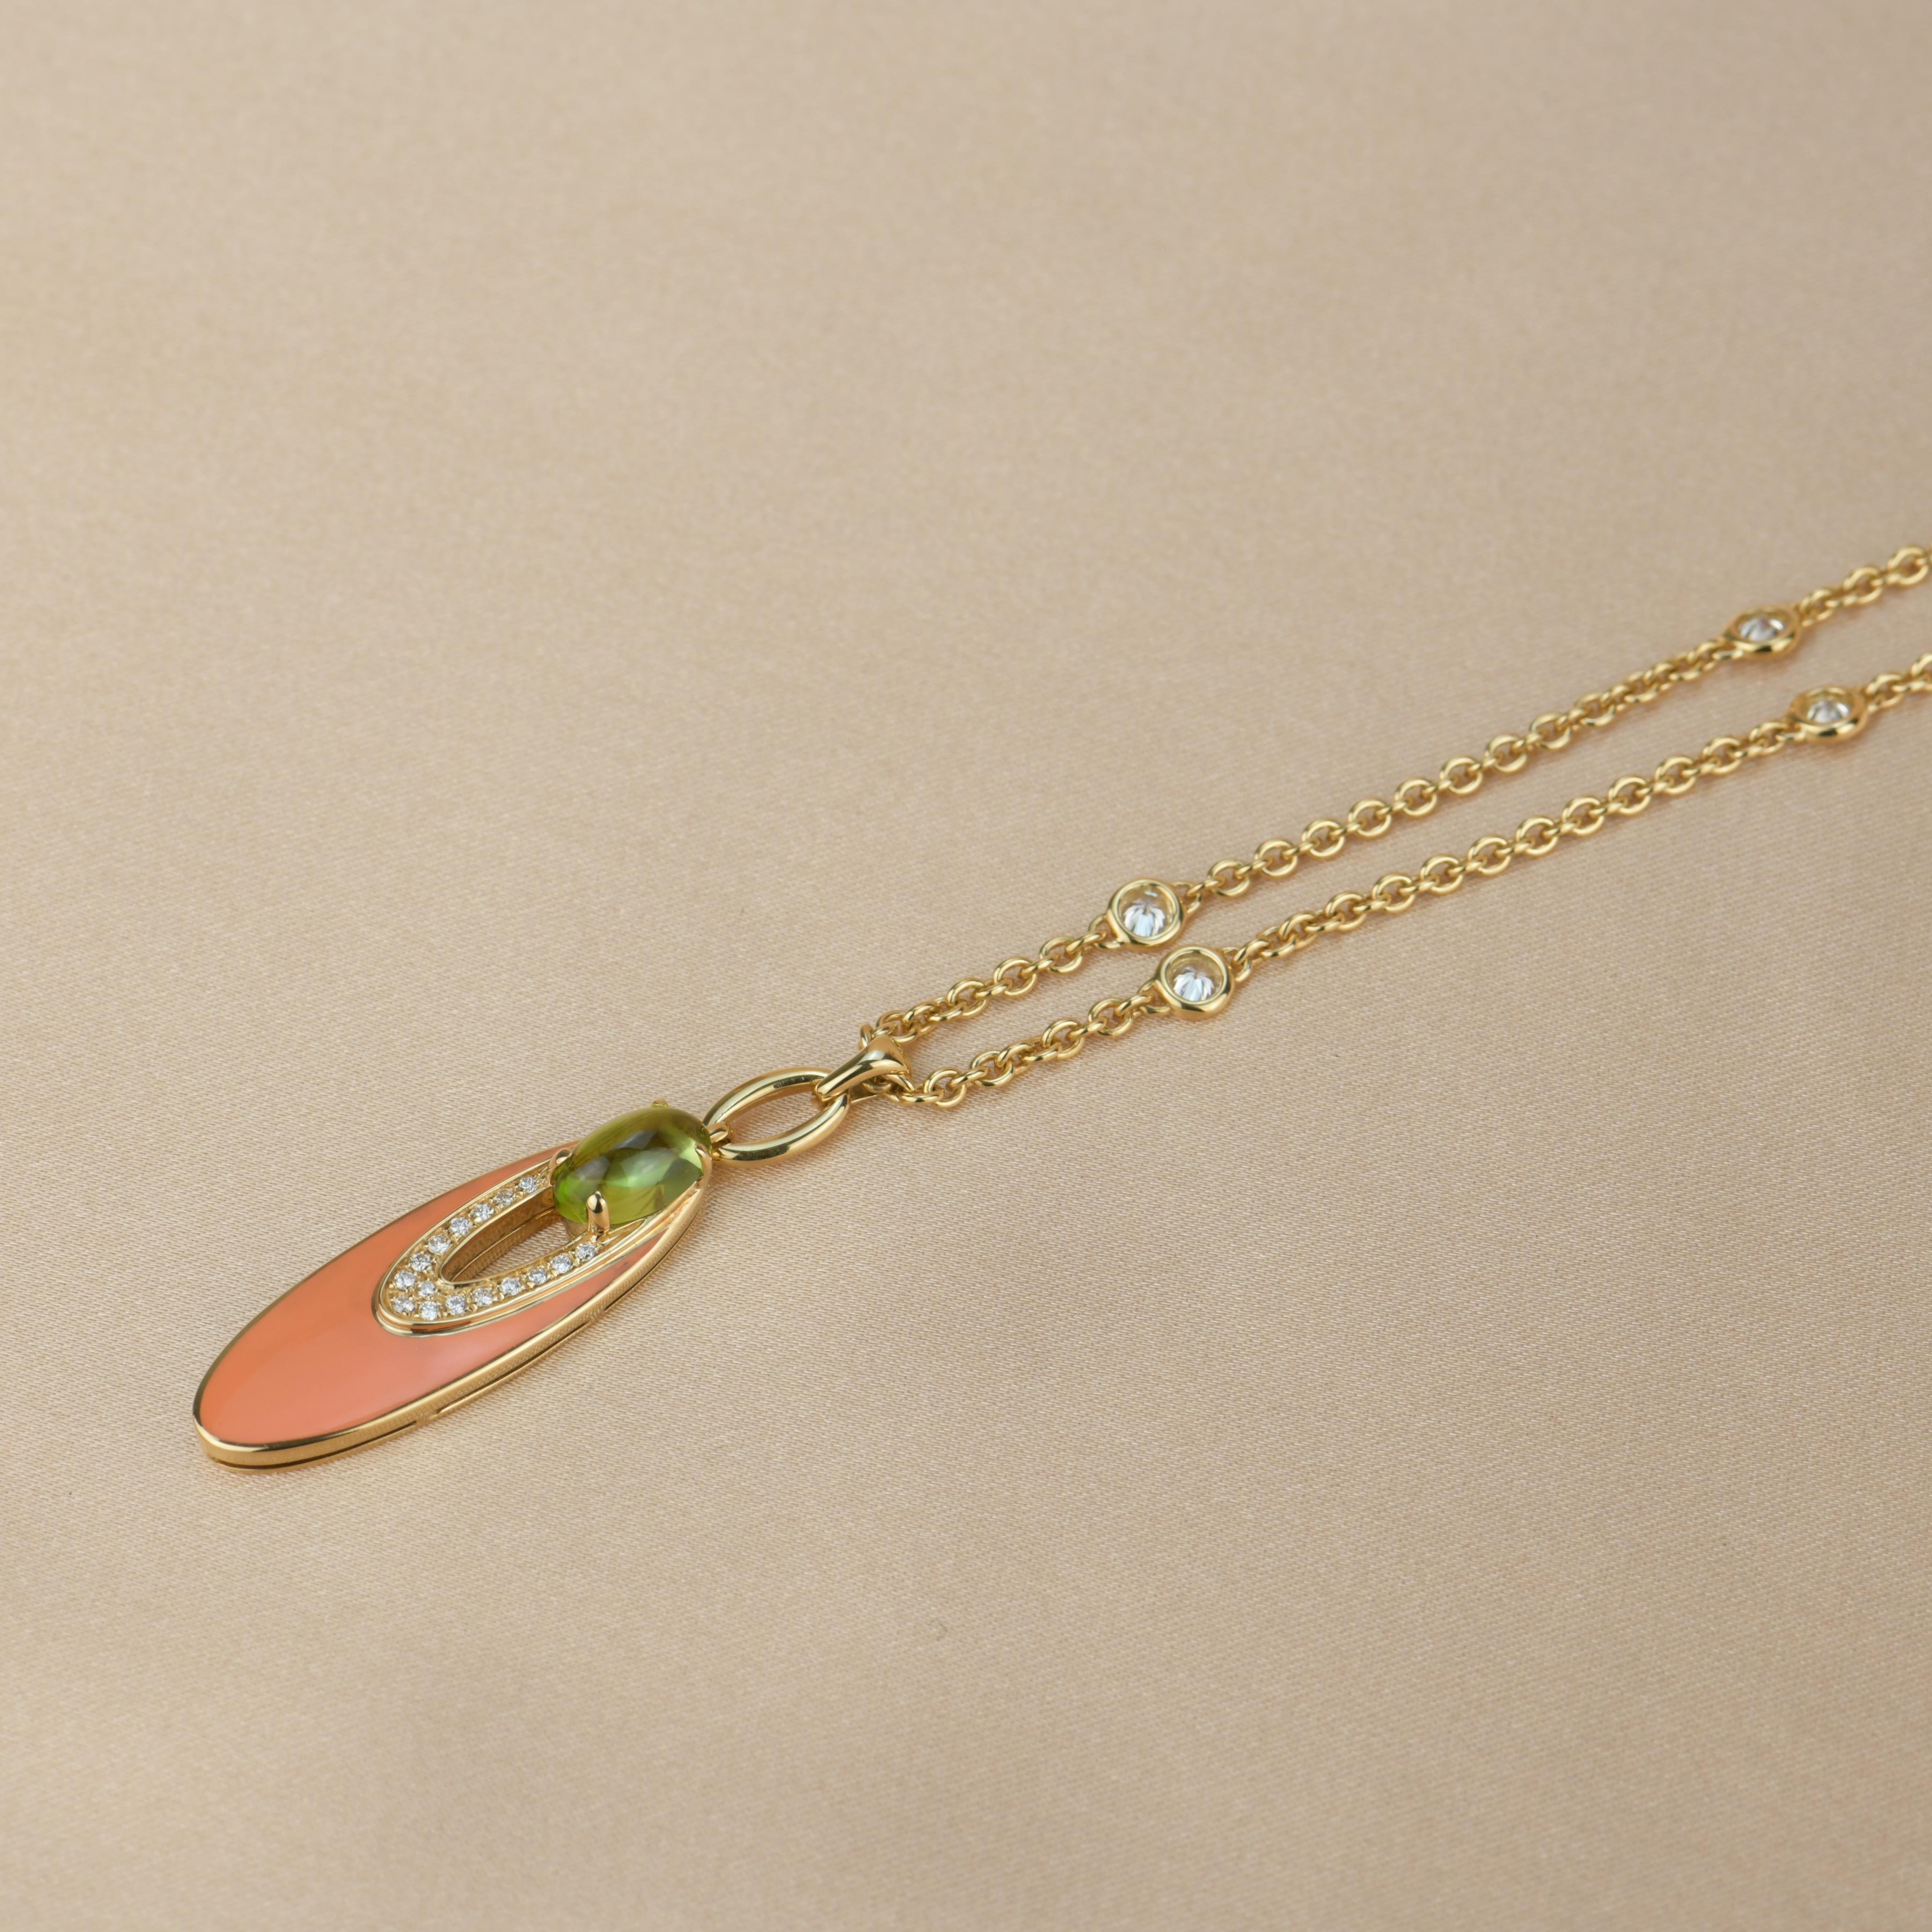 Bvlgari Peridot Diamond 18K Gold Pendant Necklace In Excellent Condition For Sale In Banbury, GB